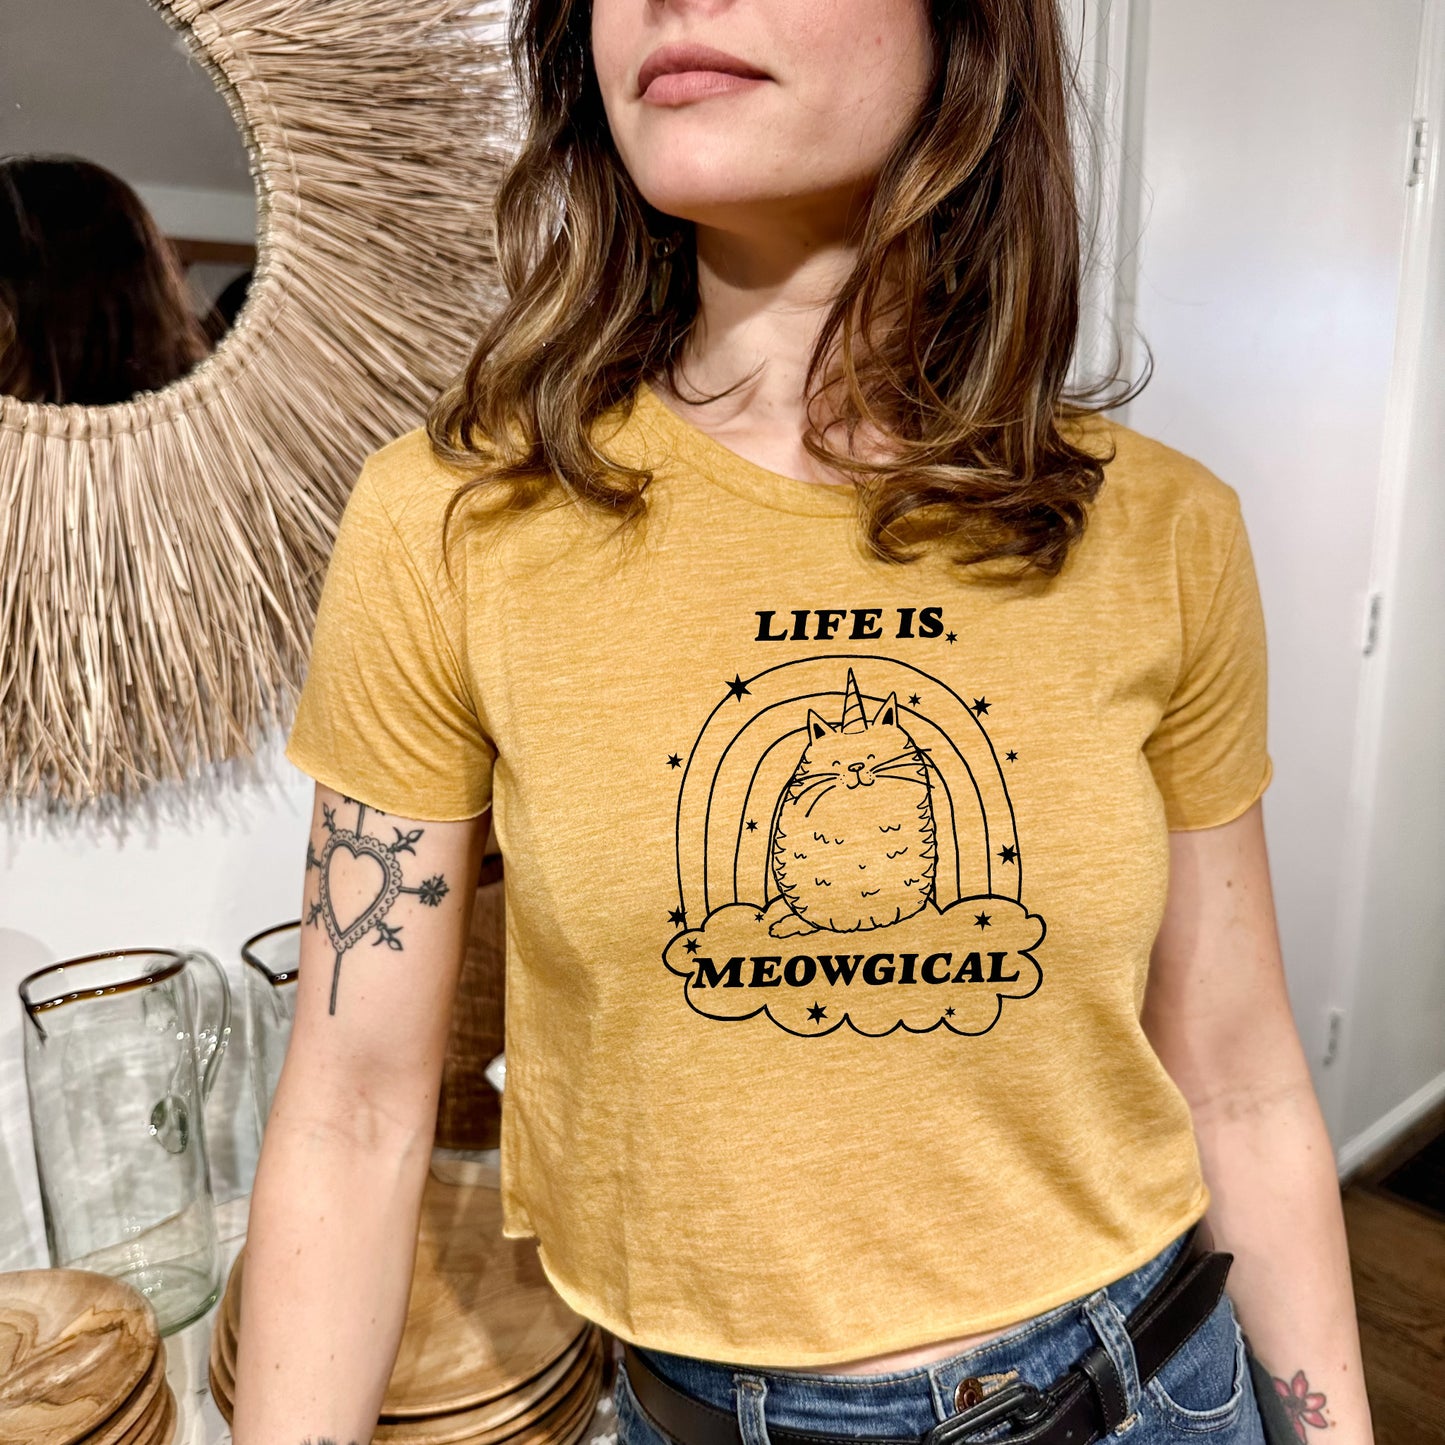 Life Is Meowgical (Cat) - Women's Crop Tee - Heather Gray or Gold